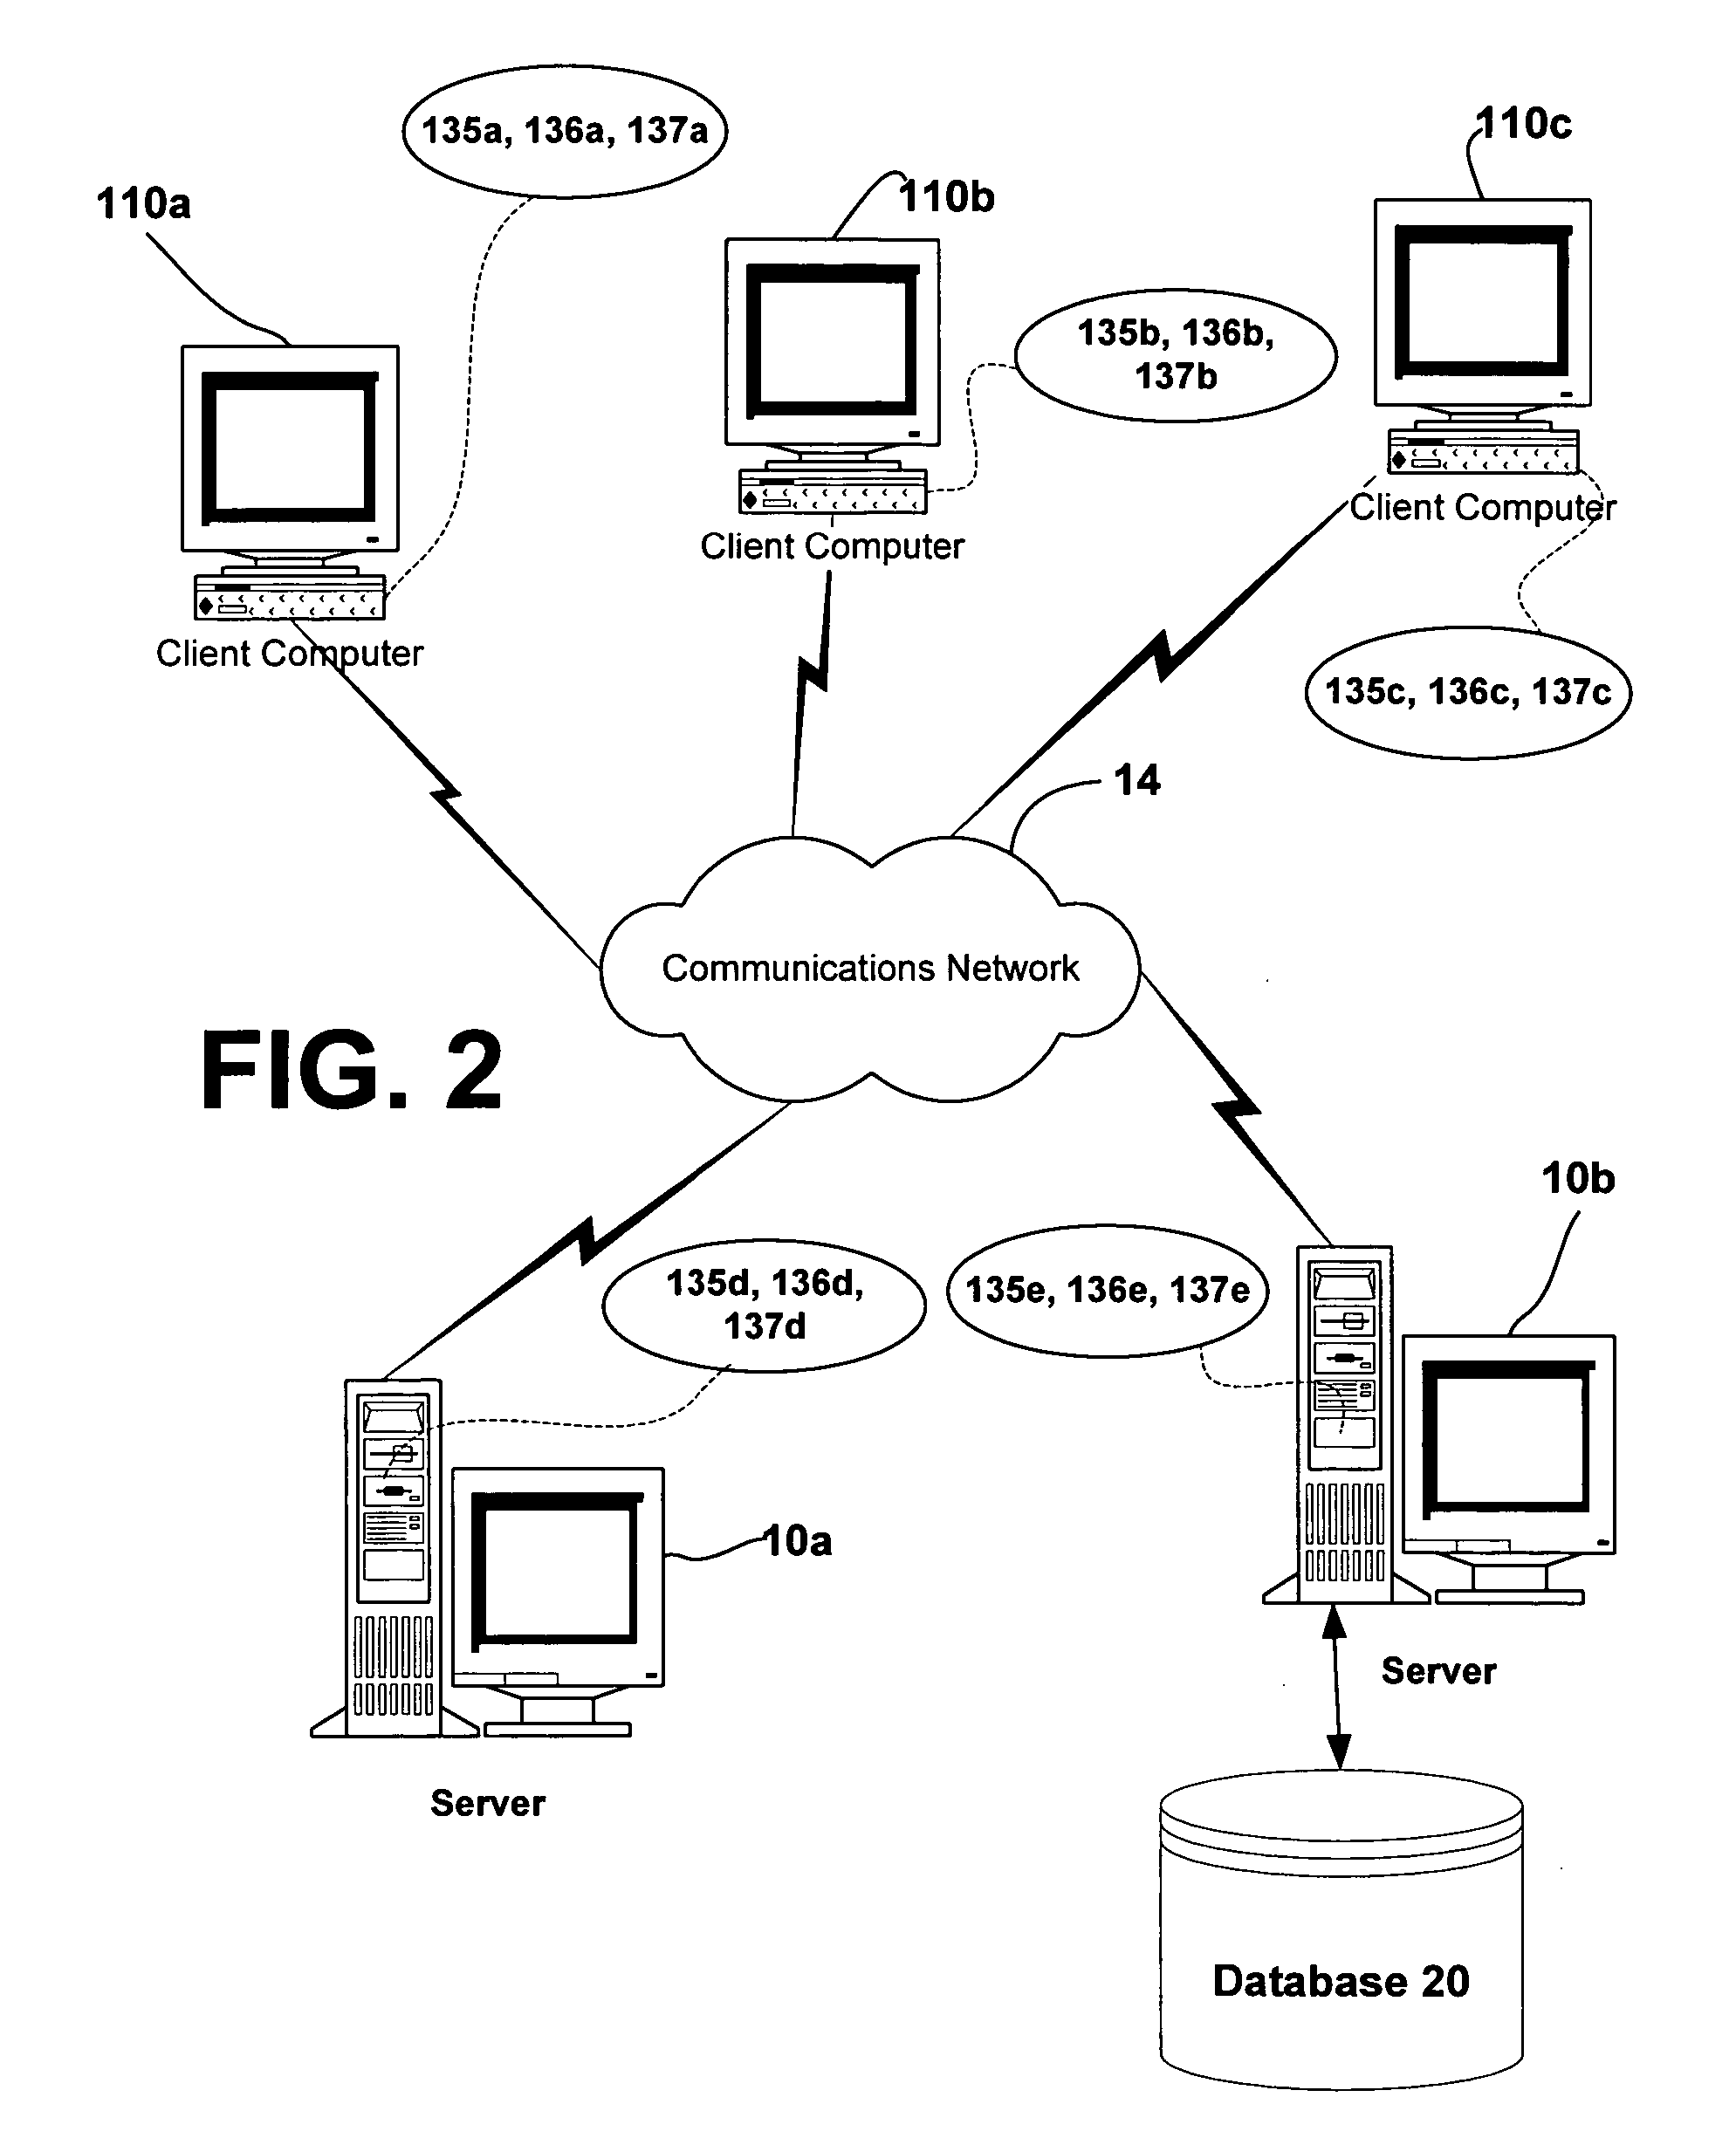 System and methods for processing software authorization and error feedback